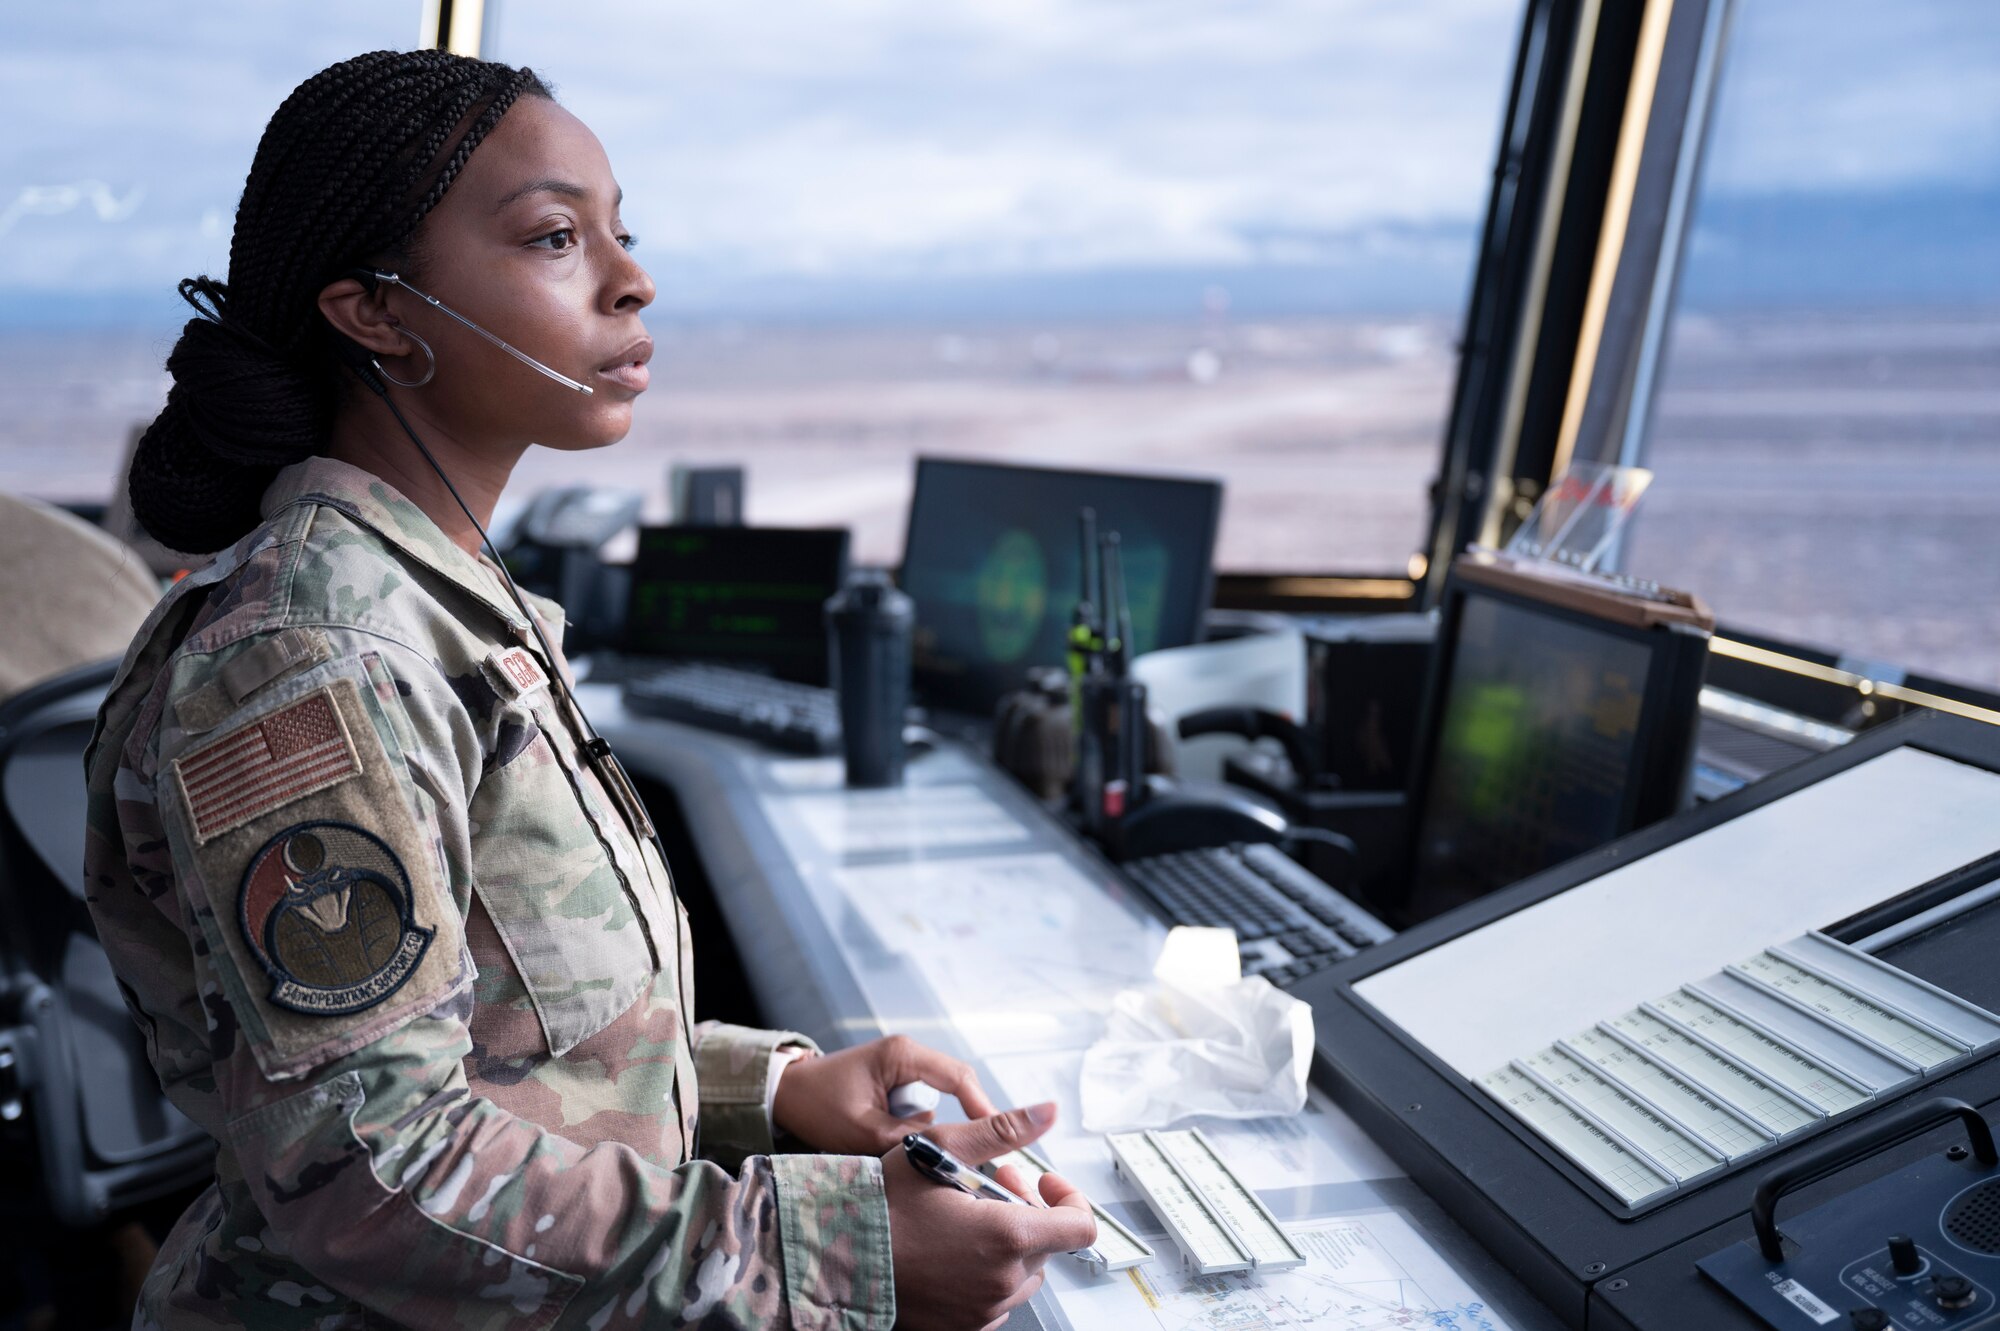 U.S. Air Force Airman 1st Class Indya Wiggins, 54th Operations Support Squadron air traffic controller, scans the runway for taxiway activity, at Holloman Air Force Base, New Mexico, Jan. 24, 2024. Air traffic controllers operate air traffic systems to expedite the flow of all inbound and outbound aircraft on base. (U.S. Air Force photo by Airman 1st Class Michelle Ferrari)